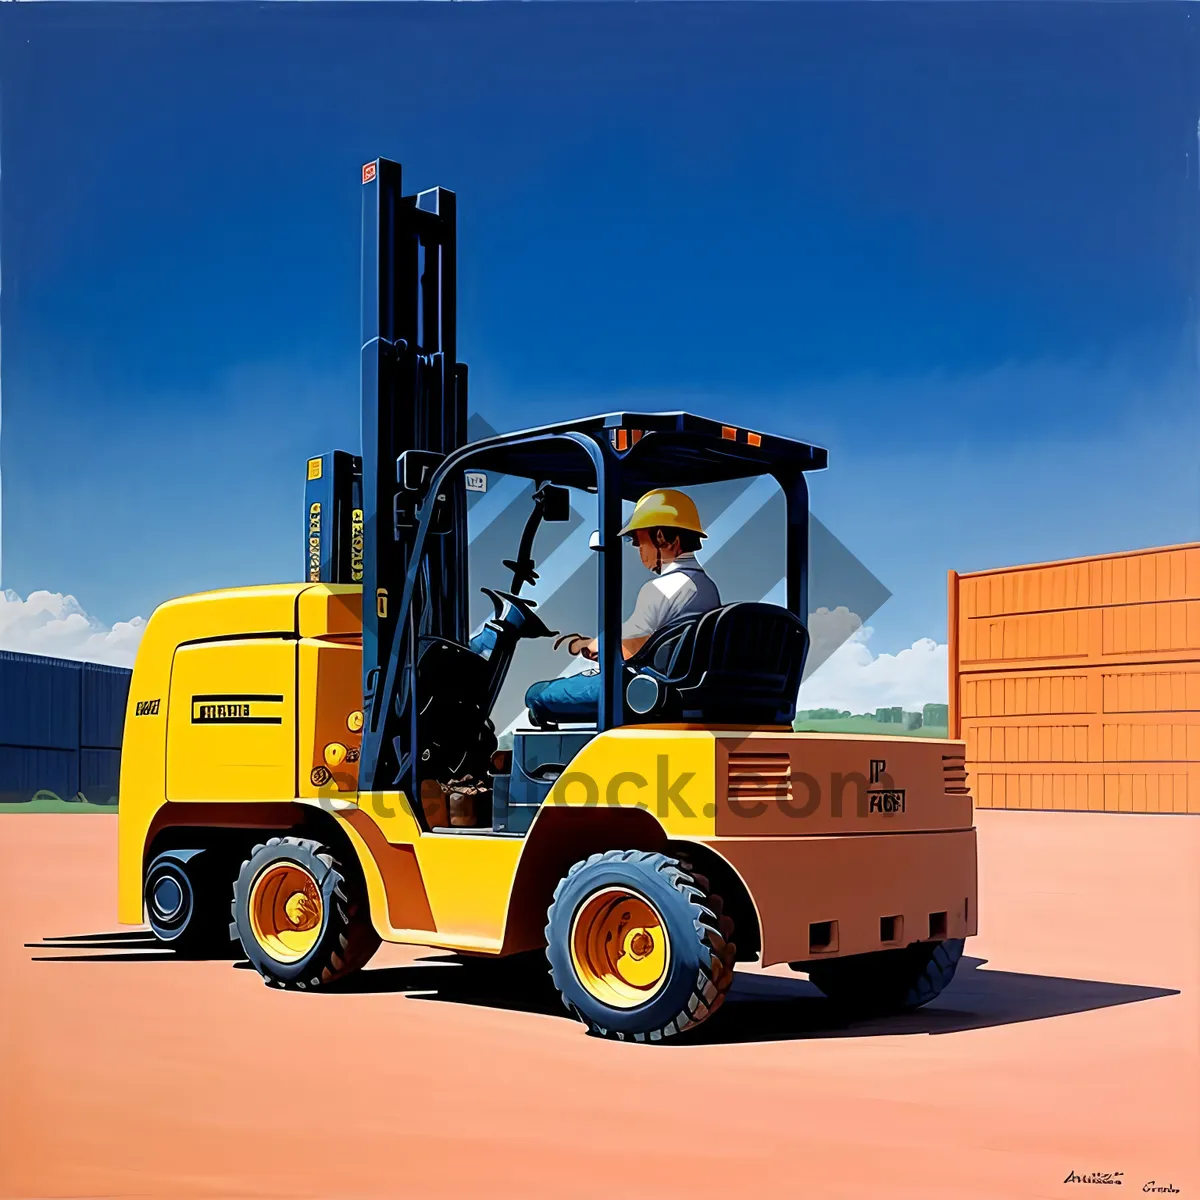 Picture of Yellow Heavy-duty Forklift Loading Construction Materials